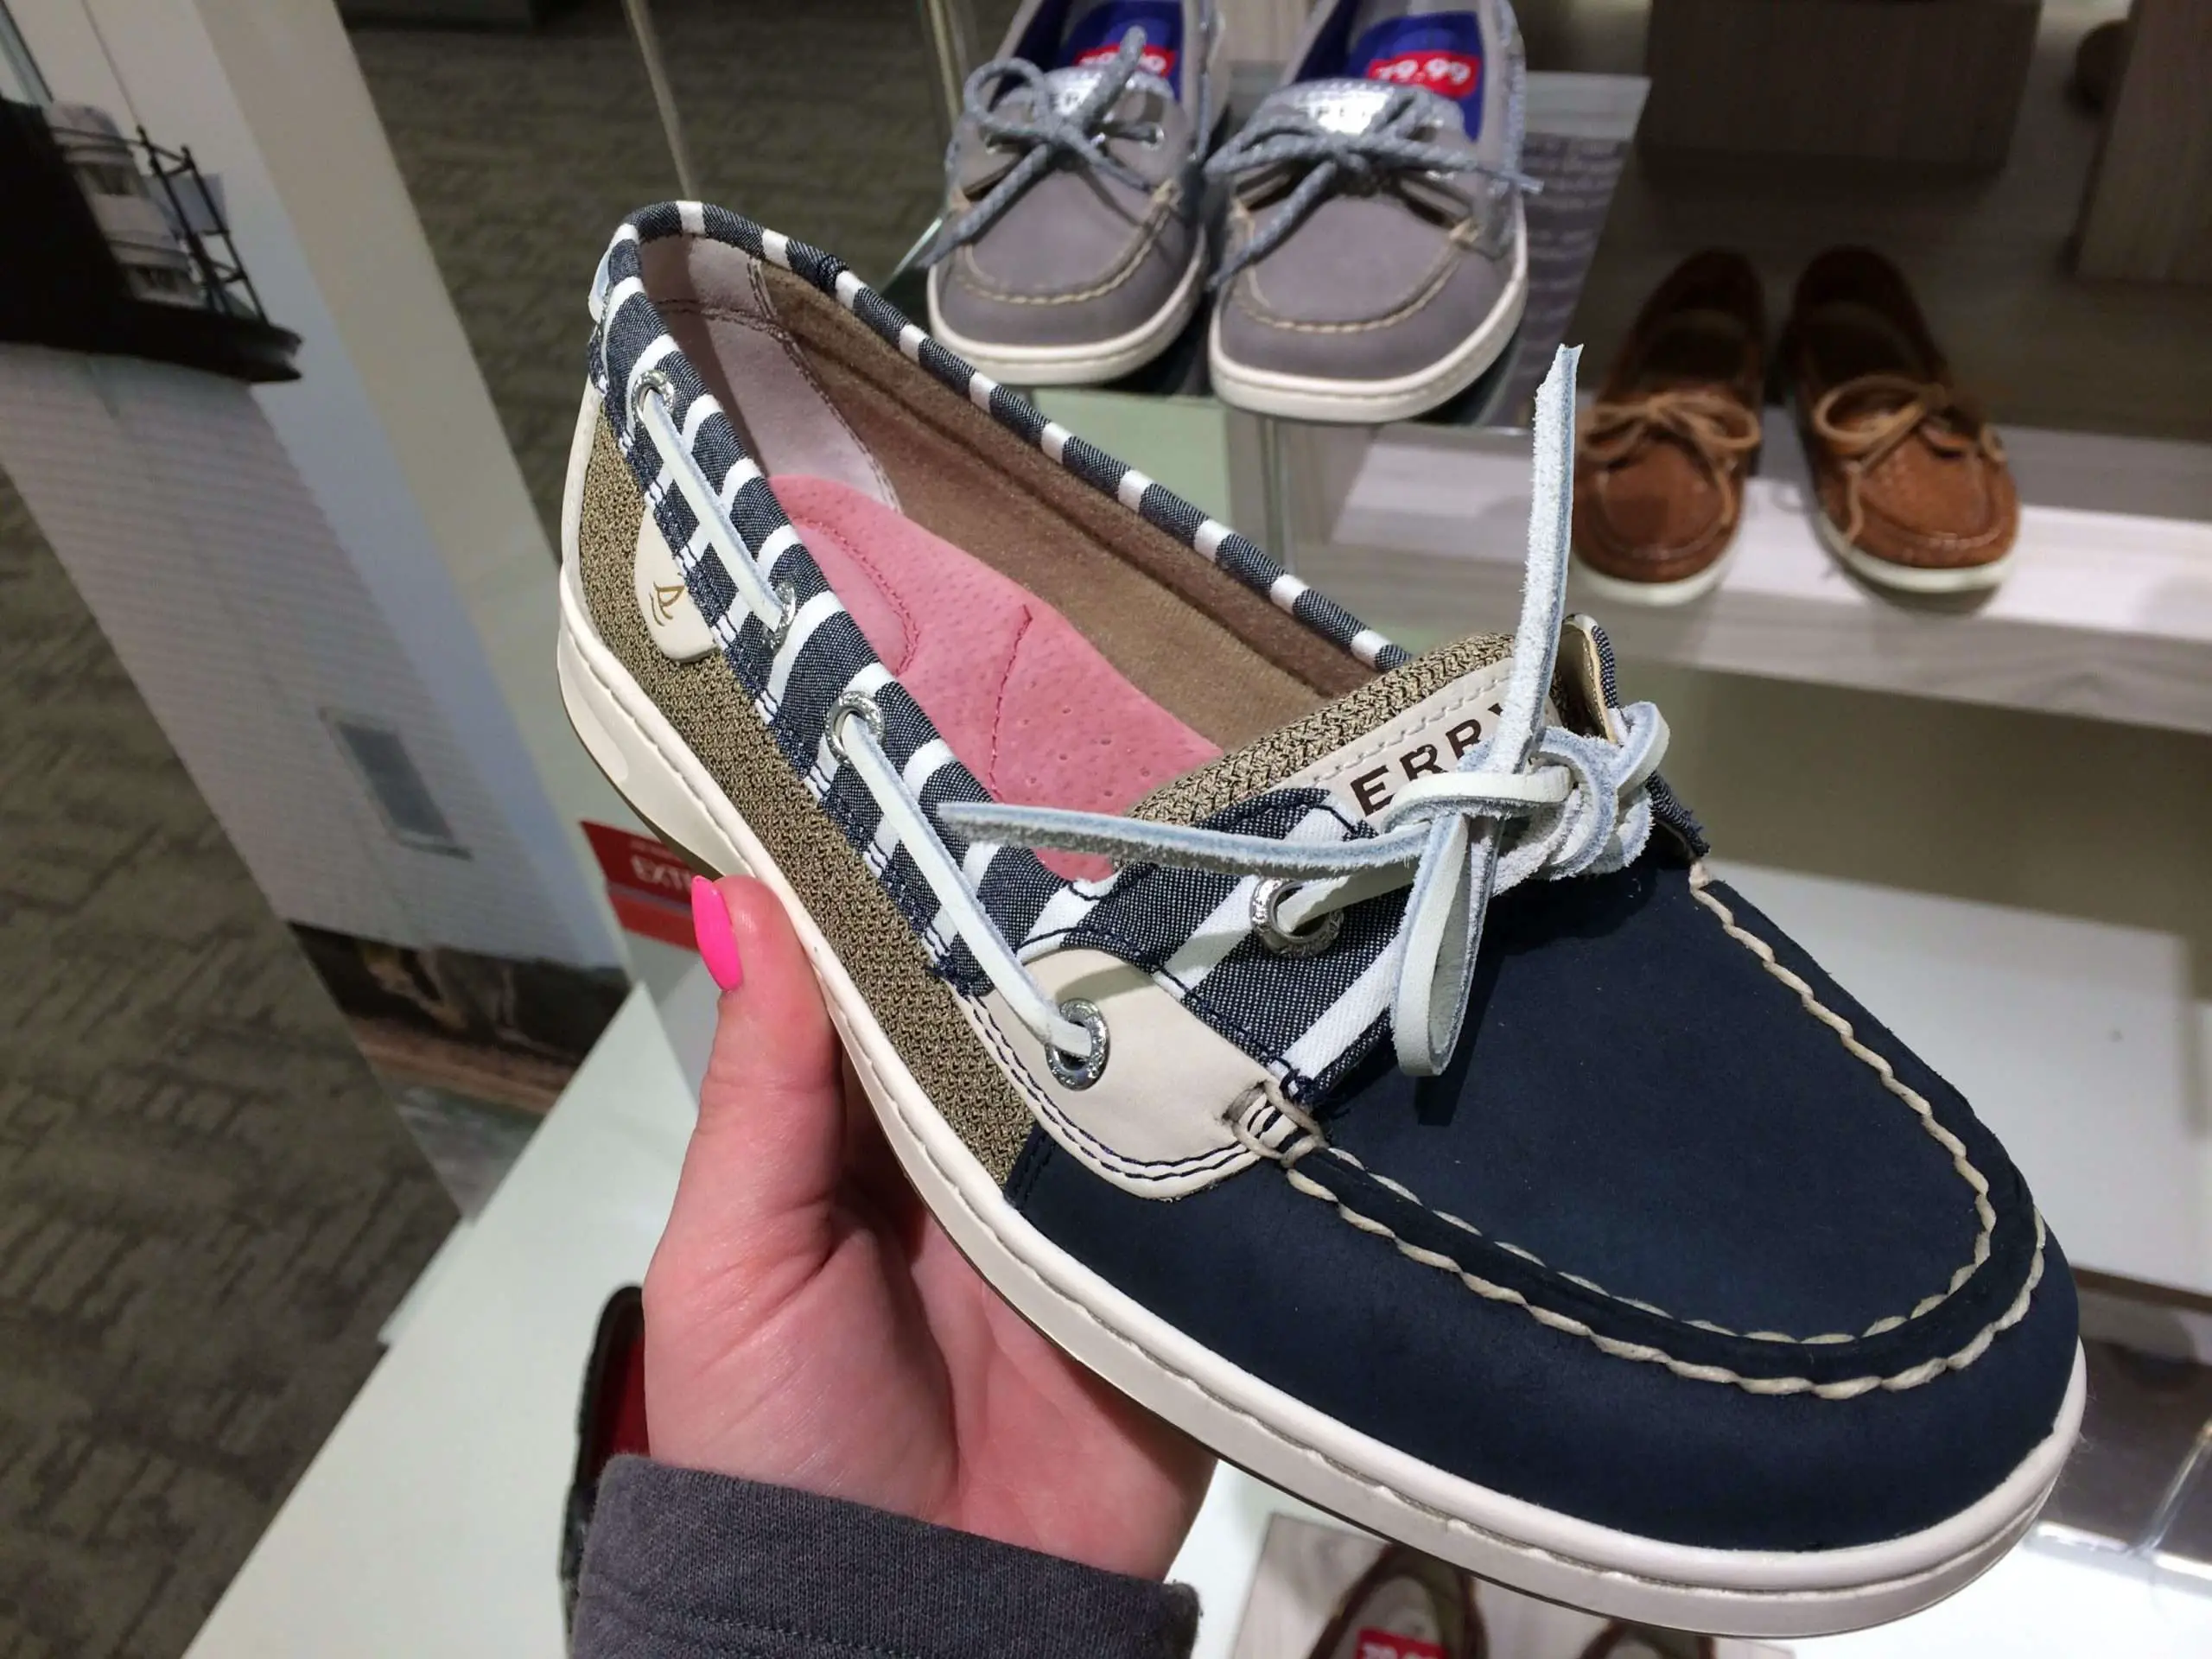 I will have these #Sperry